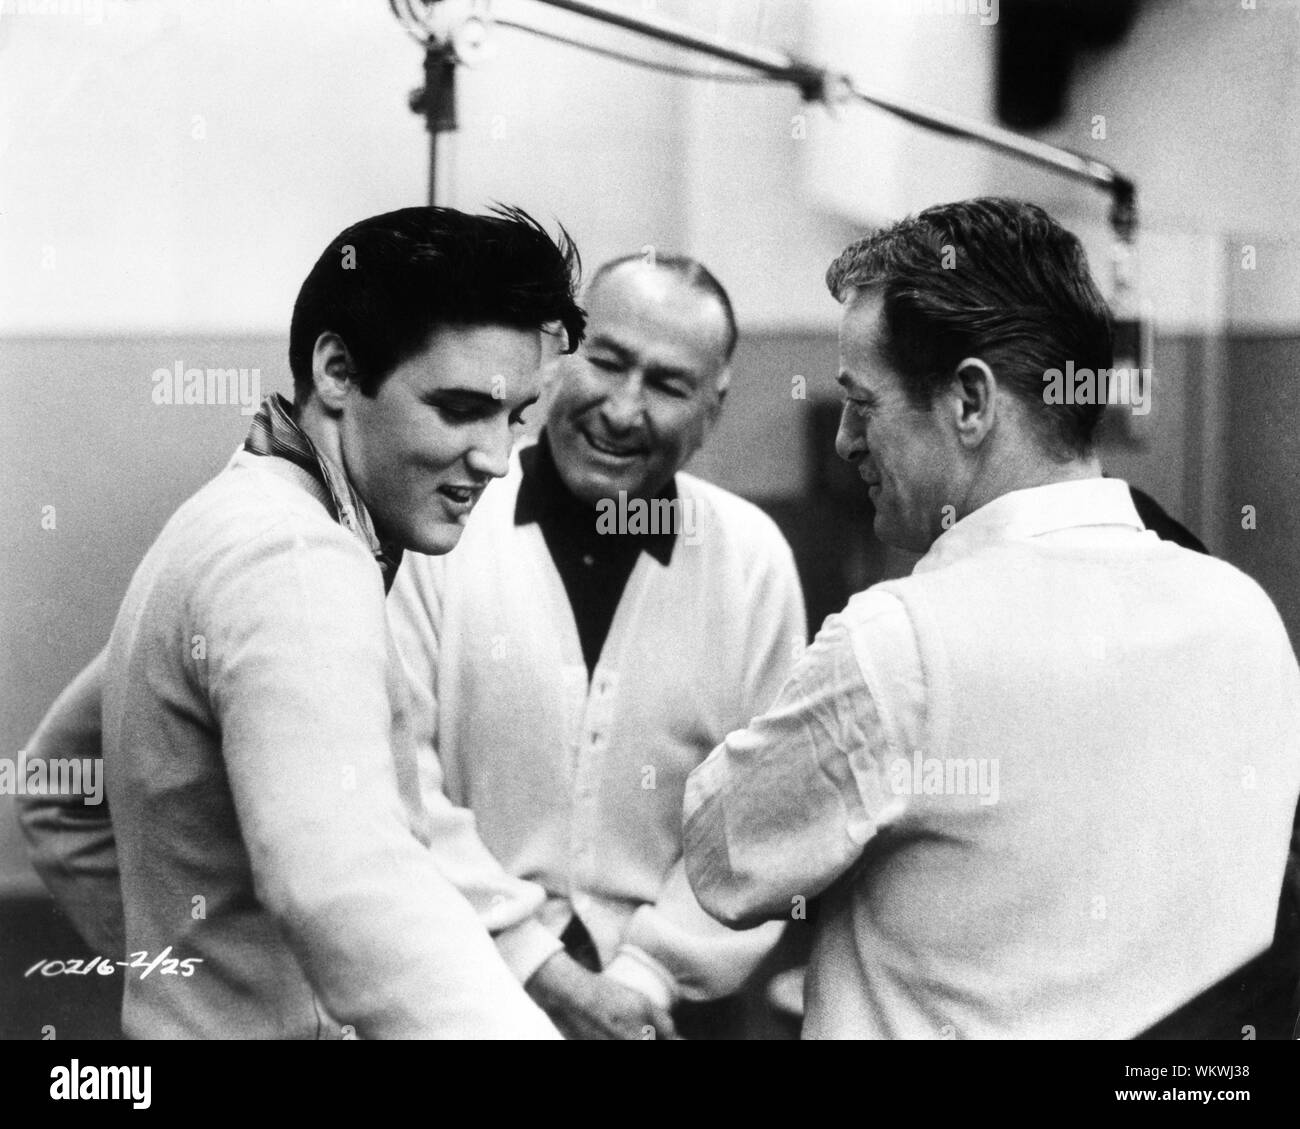 ELVIS PRESLEY producer HAL WALLIS and choreographer CHARLES O'CURRAN on set candid filming KING CREOLE 1958 director Michael Curtiz Wallis - Hazen / Paramount Pictures Stock Photo